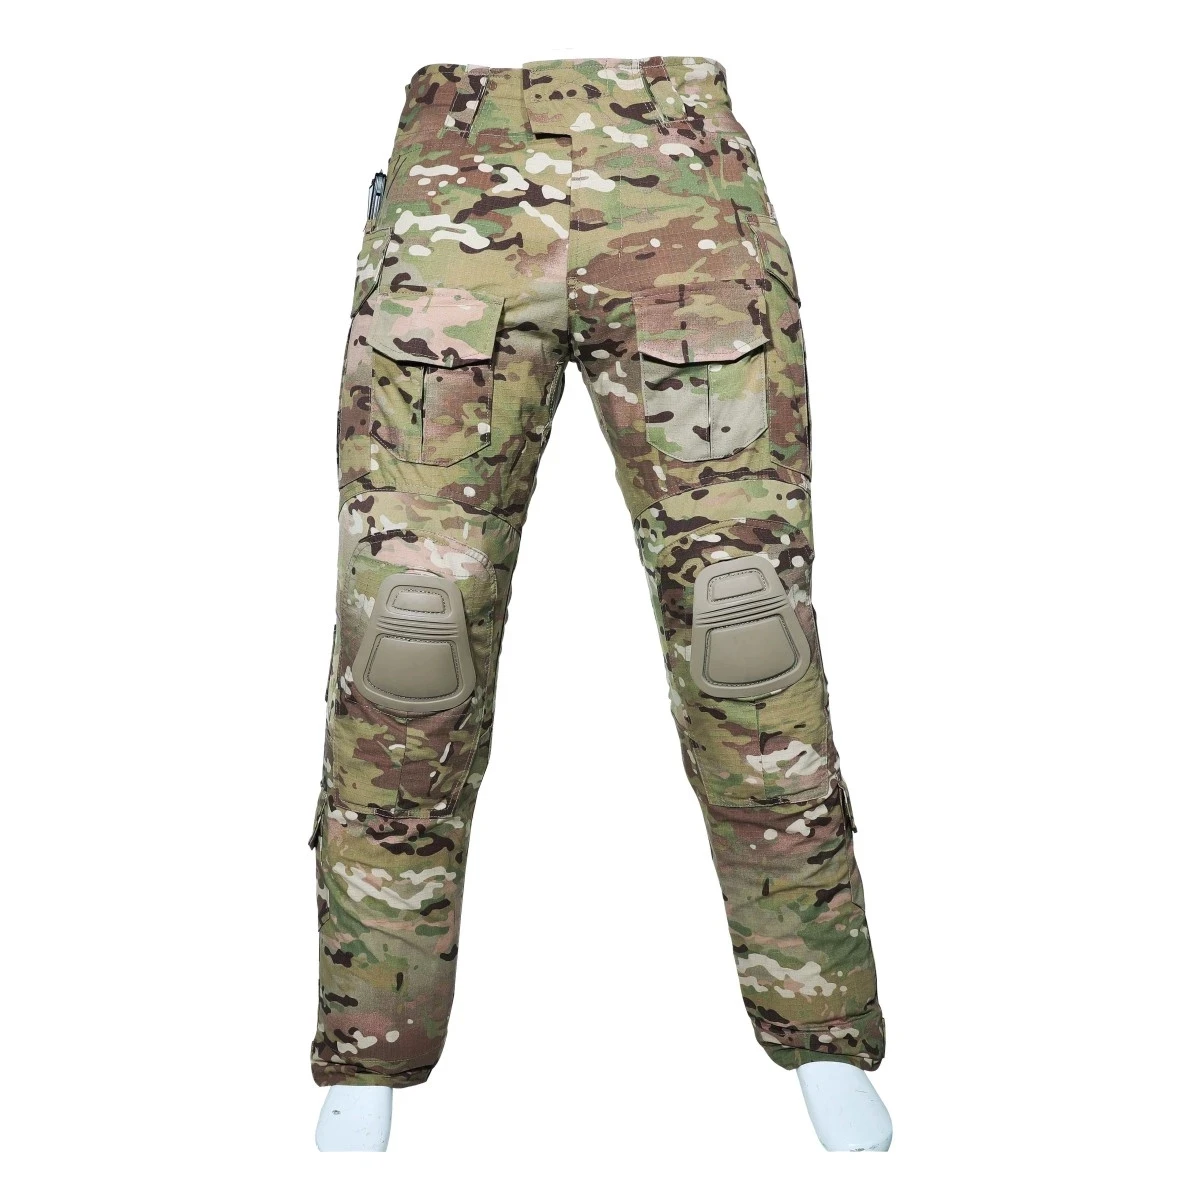 G3 Combat Pants With Knee Pads Airsoft Tactical Trousers MultiCam CP gen3 Hunting Camouflage Paintball Clothing Gear